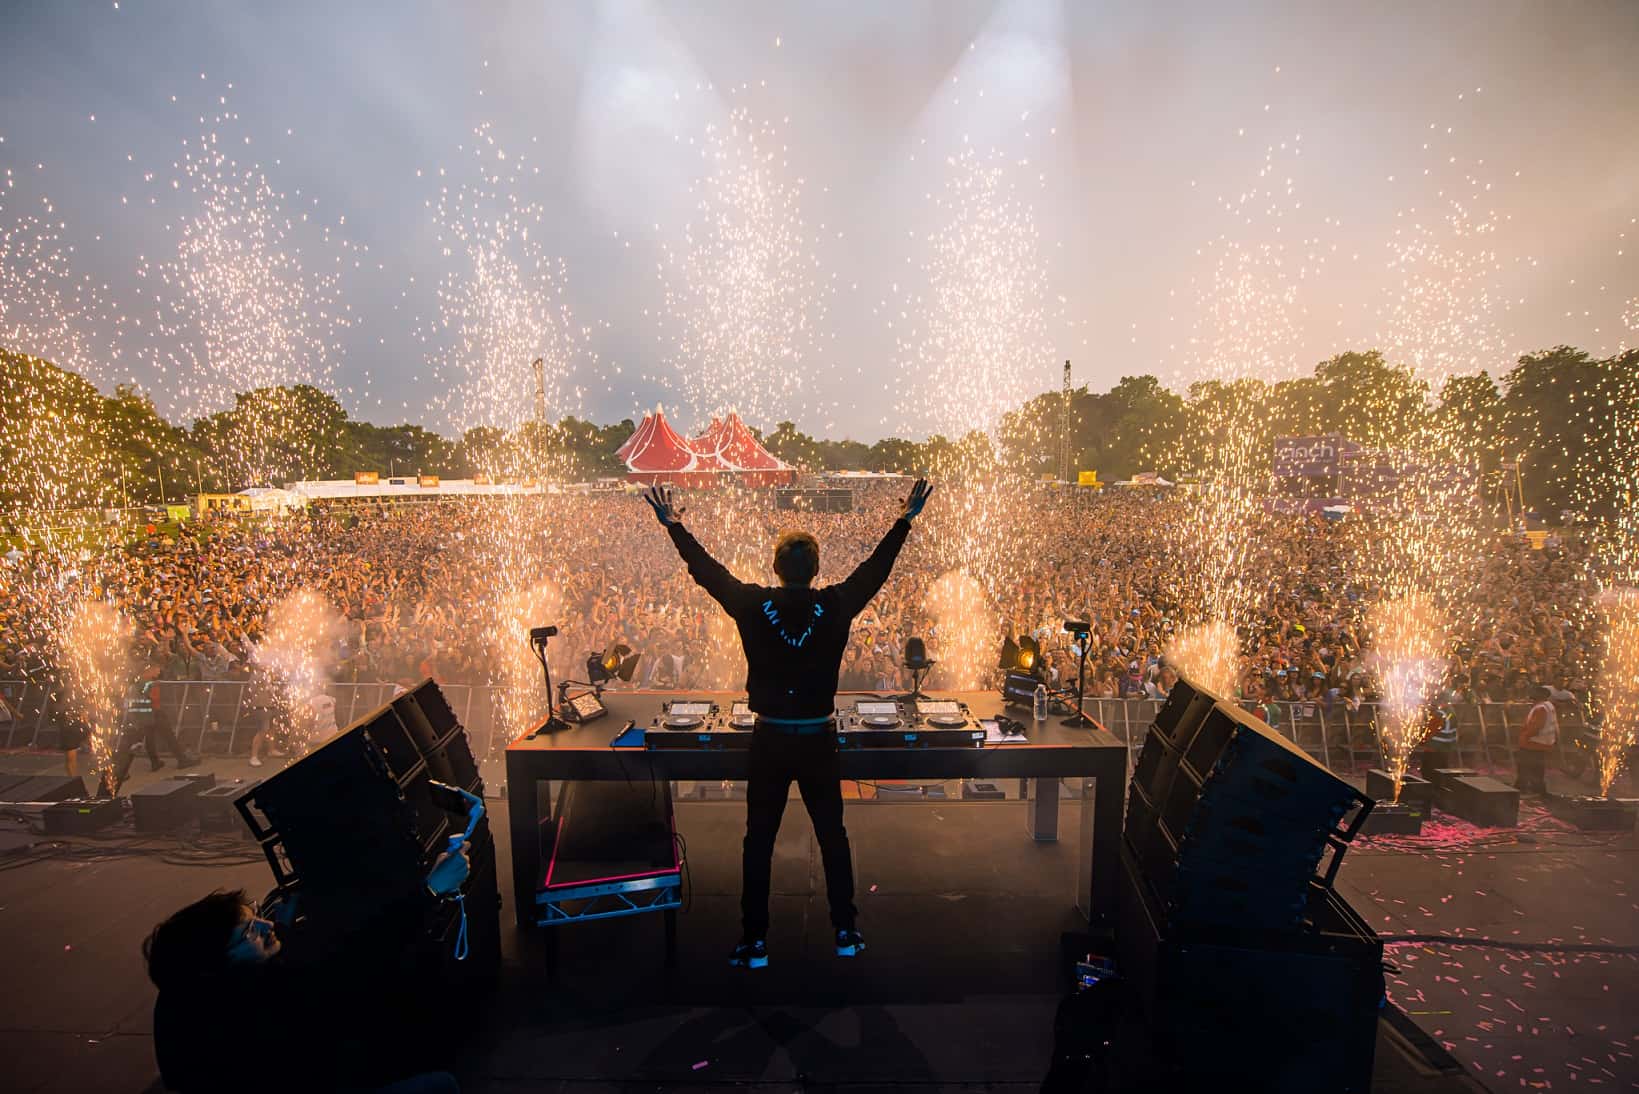 A comprehensive review of Creamfields South 2022 [Magazine Featured]